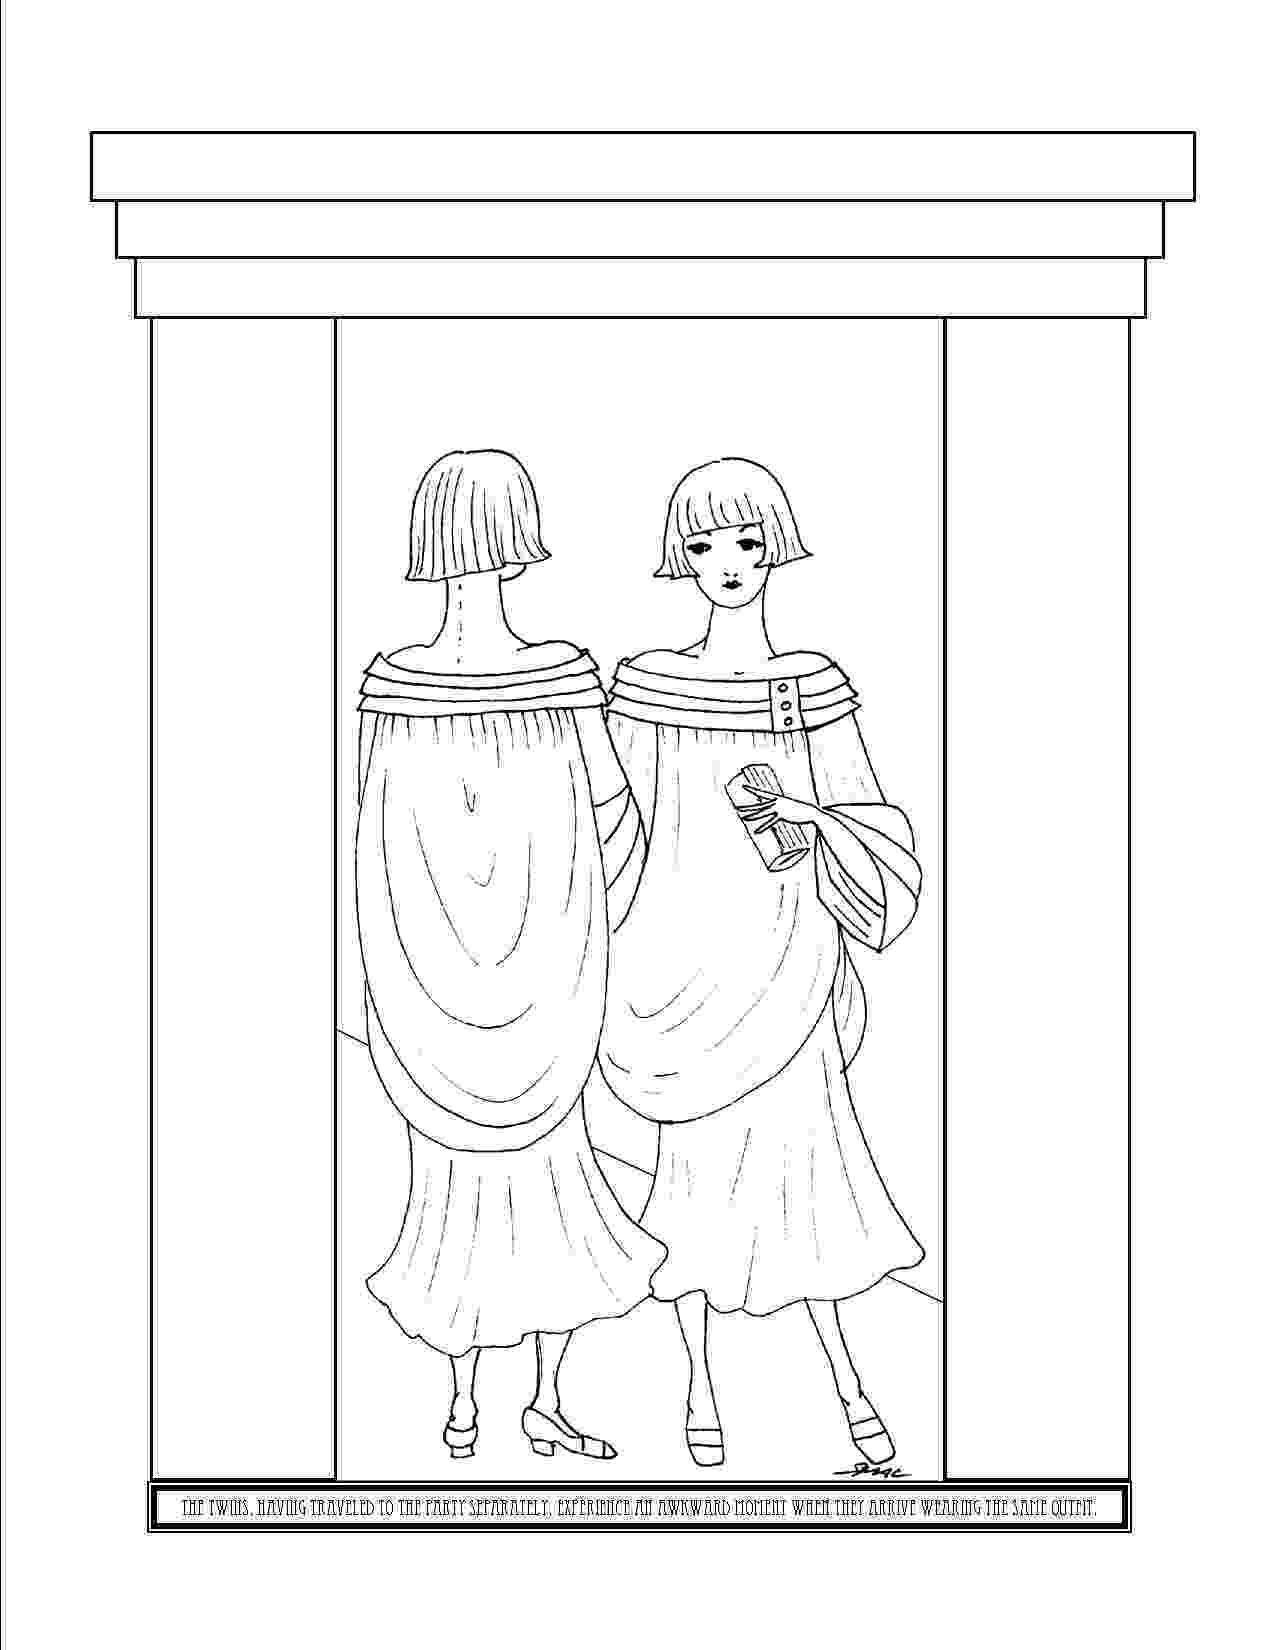 art deco coloring pages art deco coloring pages smac39s place to be pages art coloring deco 